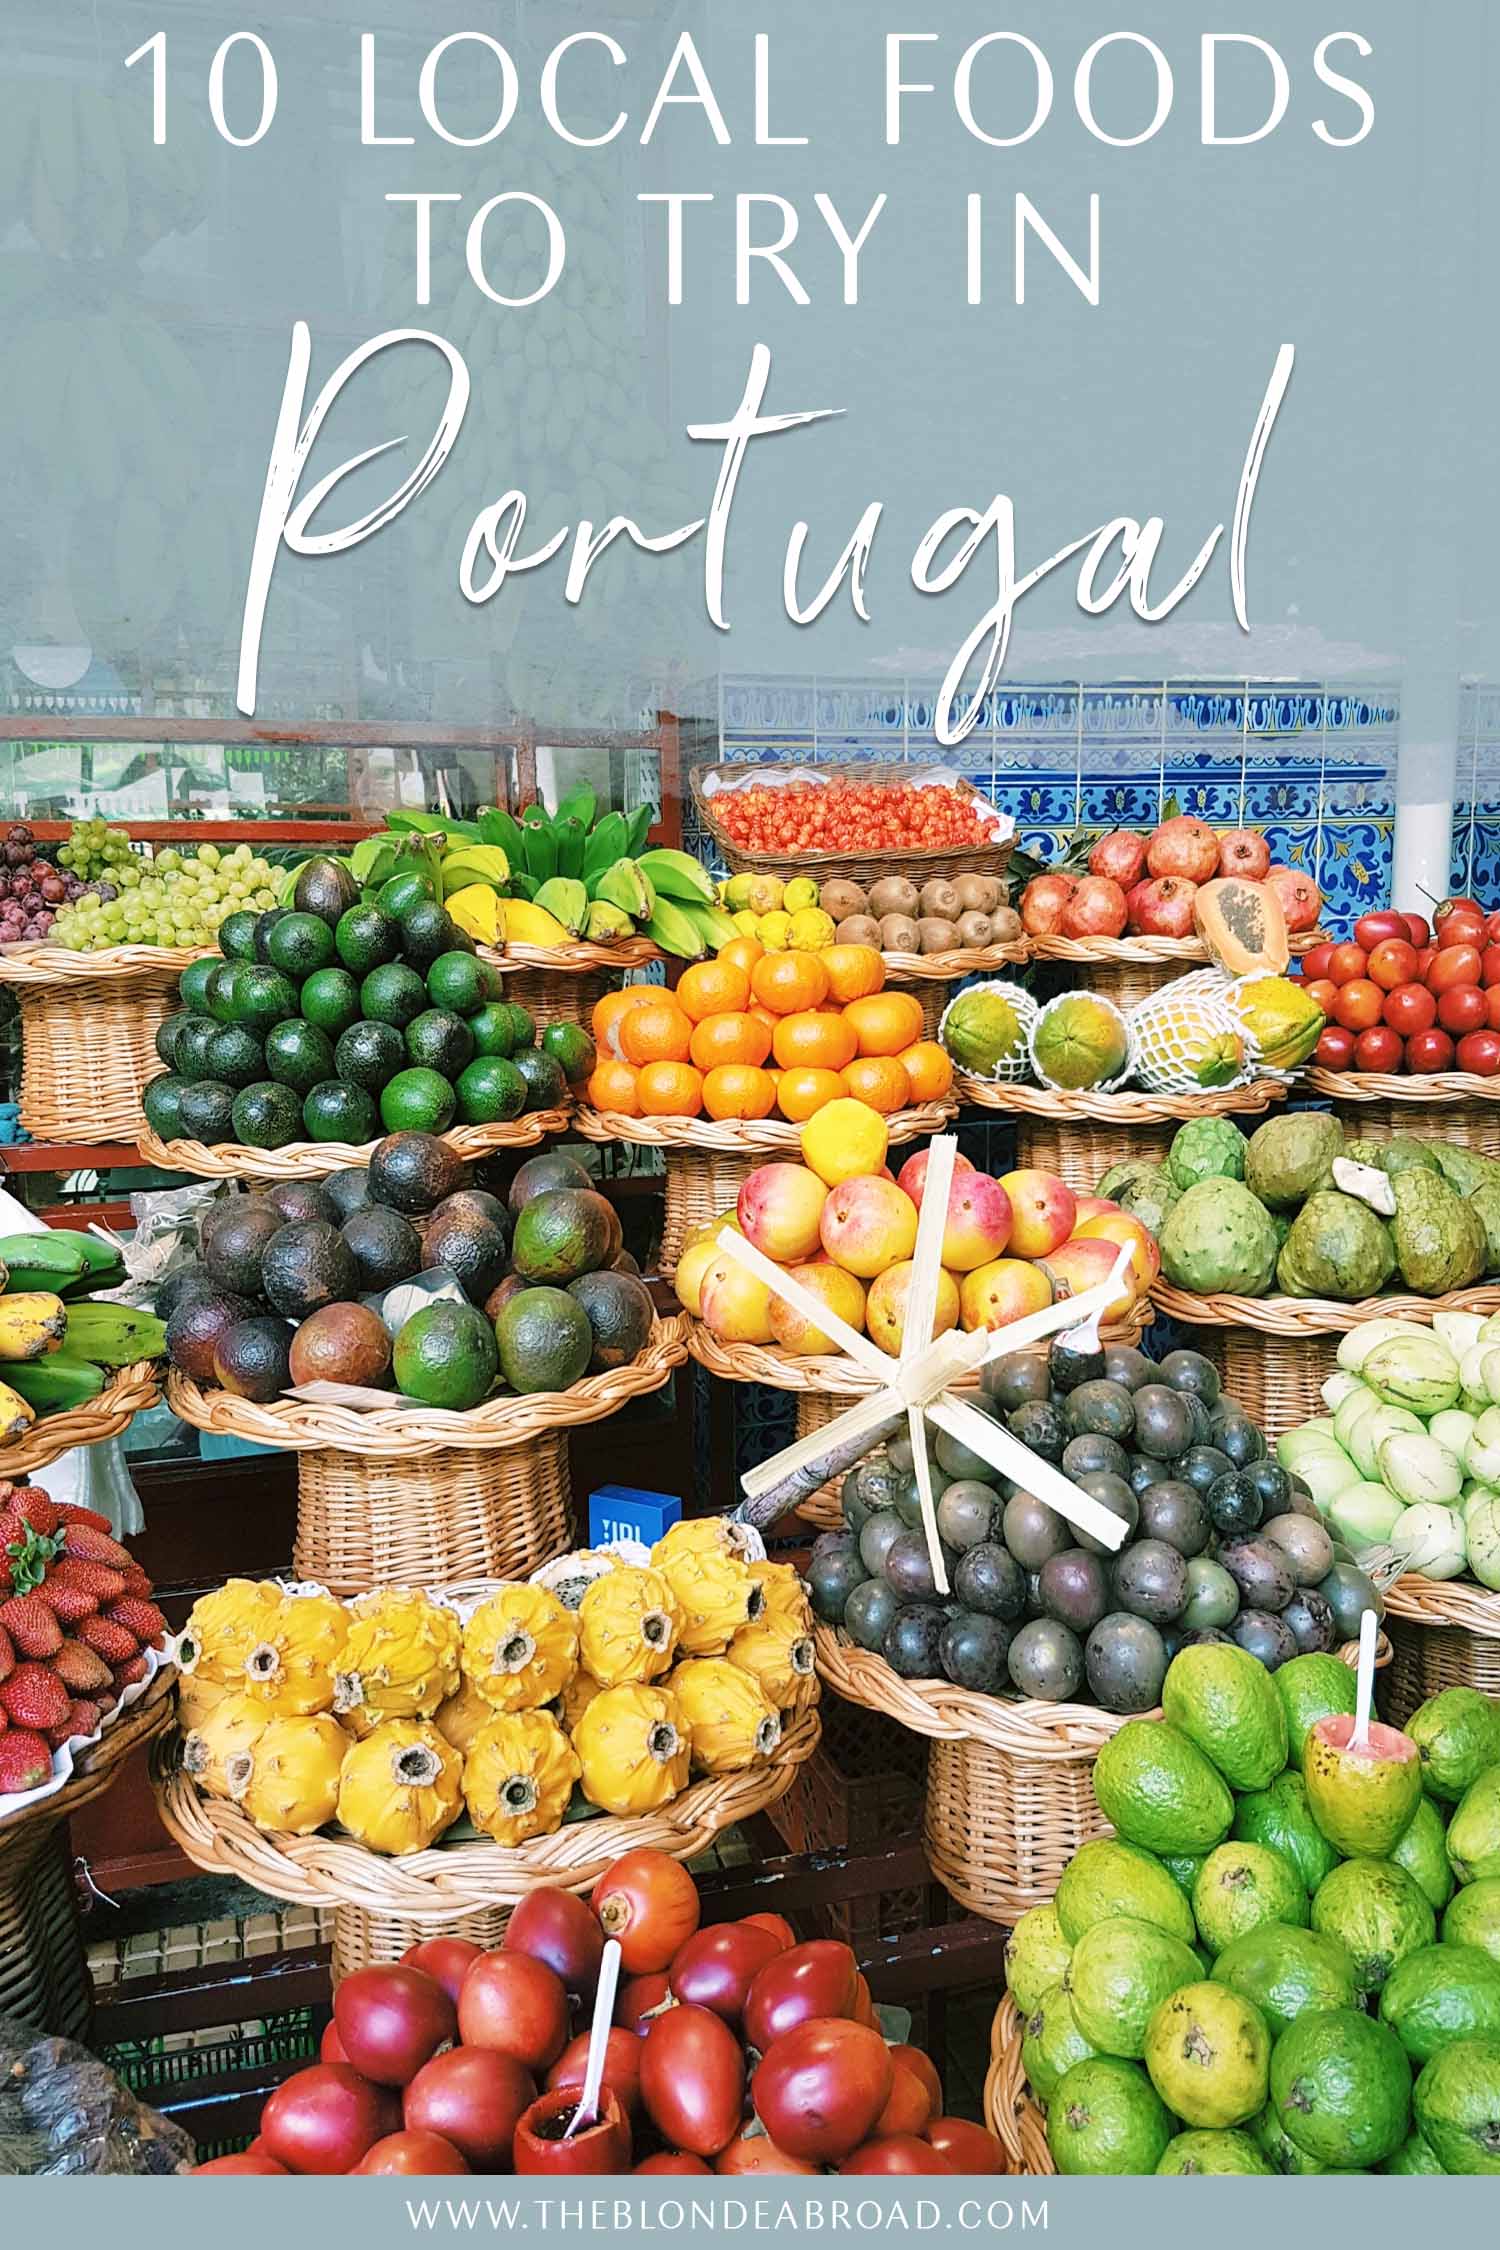 Local Foods to Try in Portugal